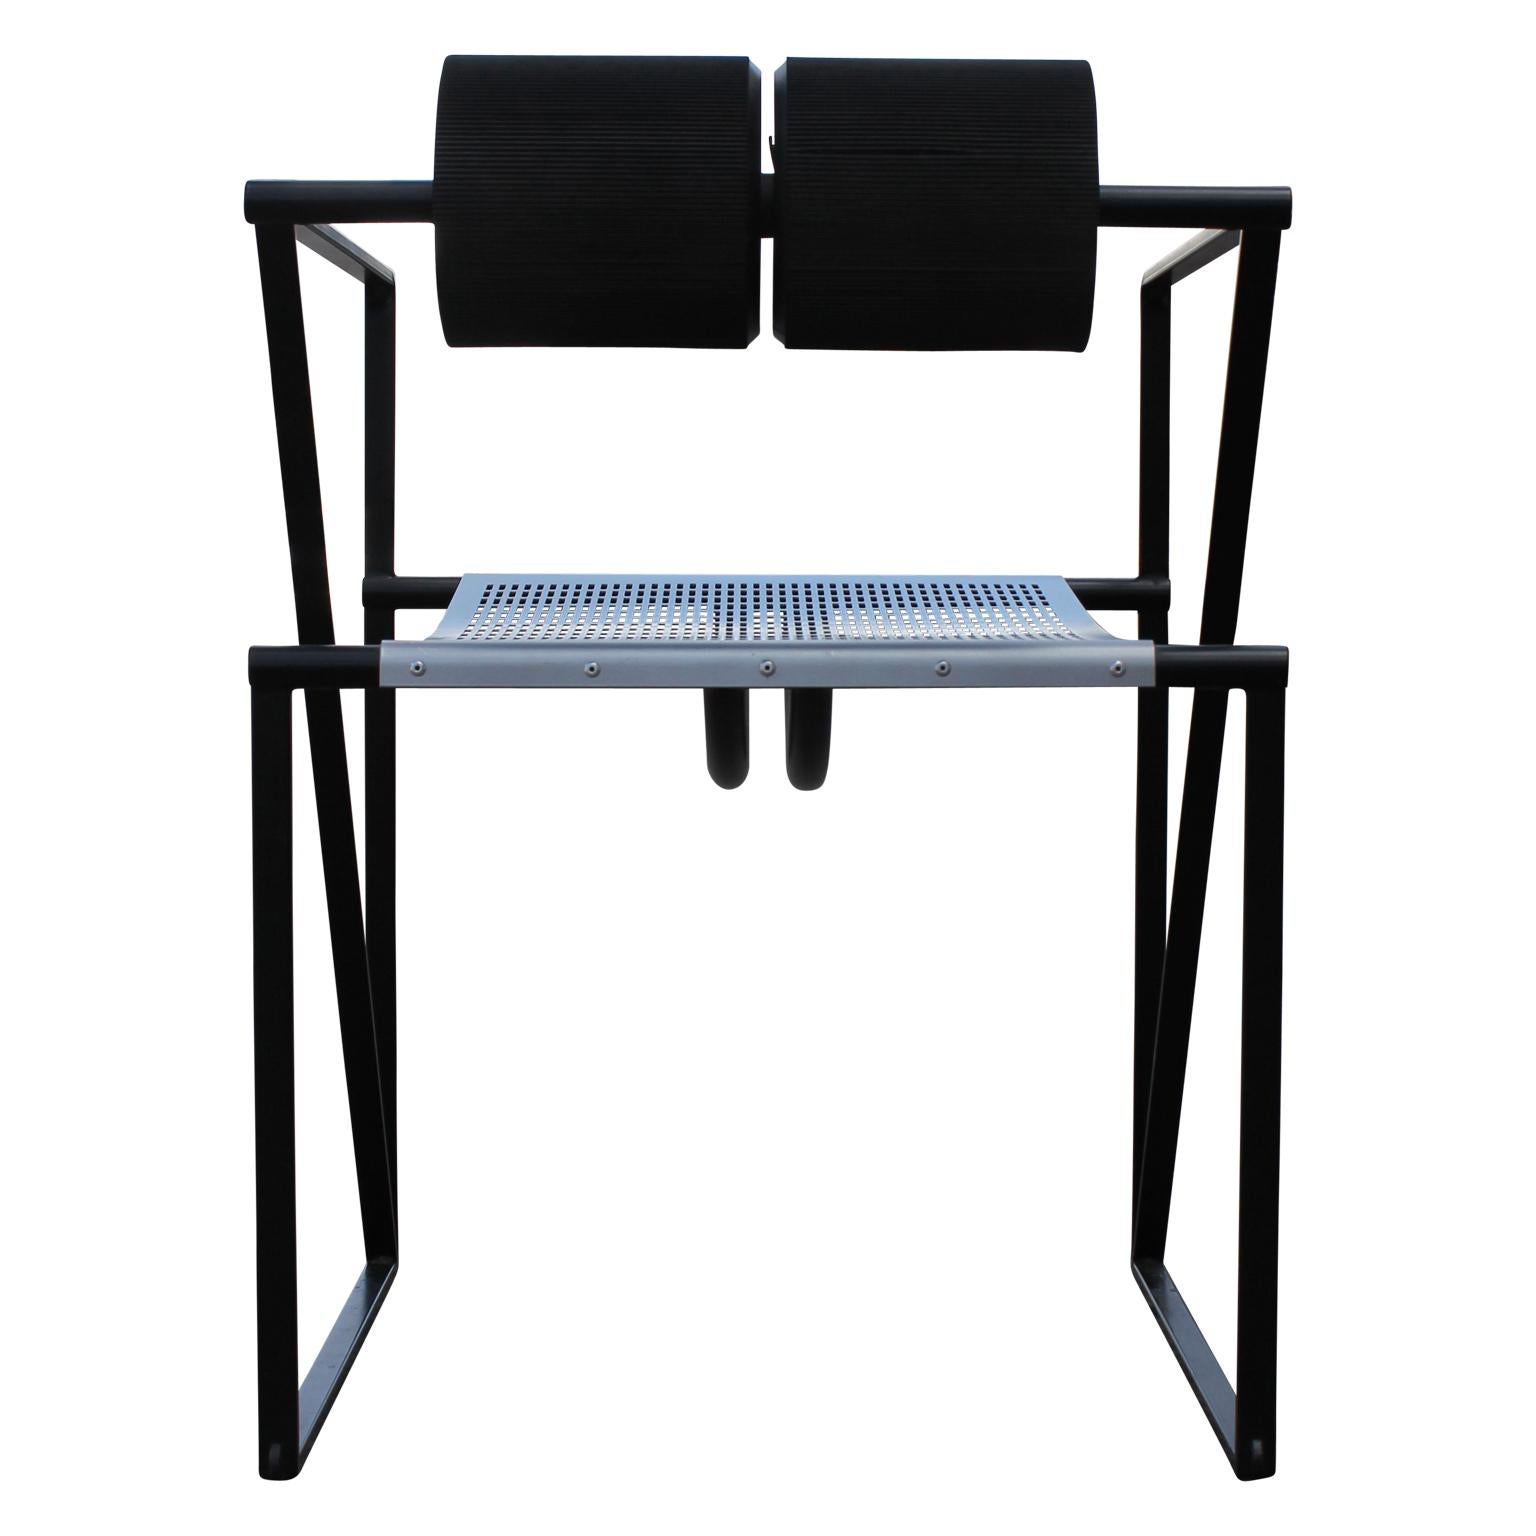 Chic modern pair of secunda memphis dining chairs. They are style 602 by Mario Botta for Alias.